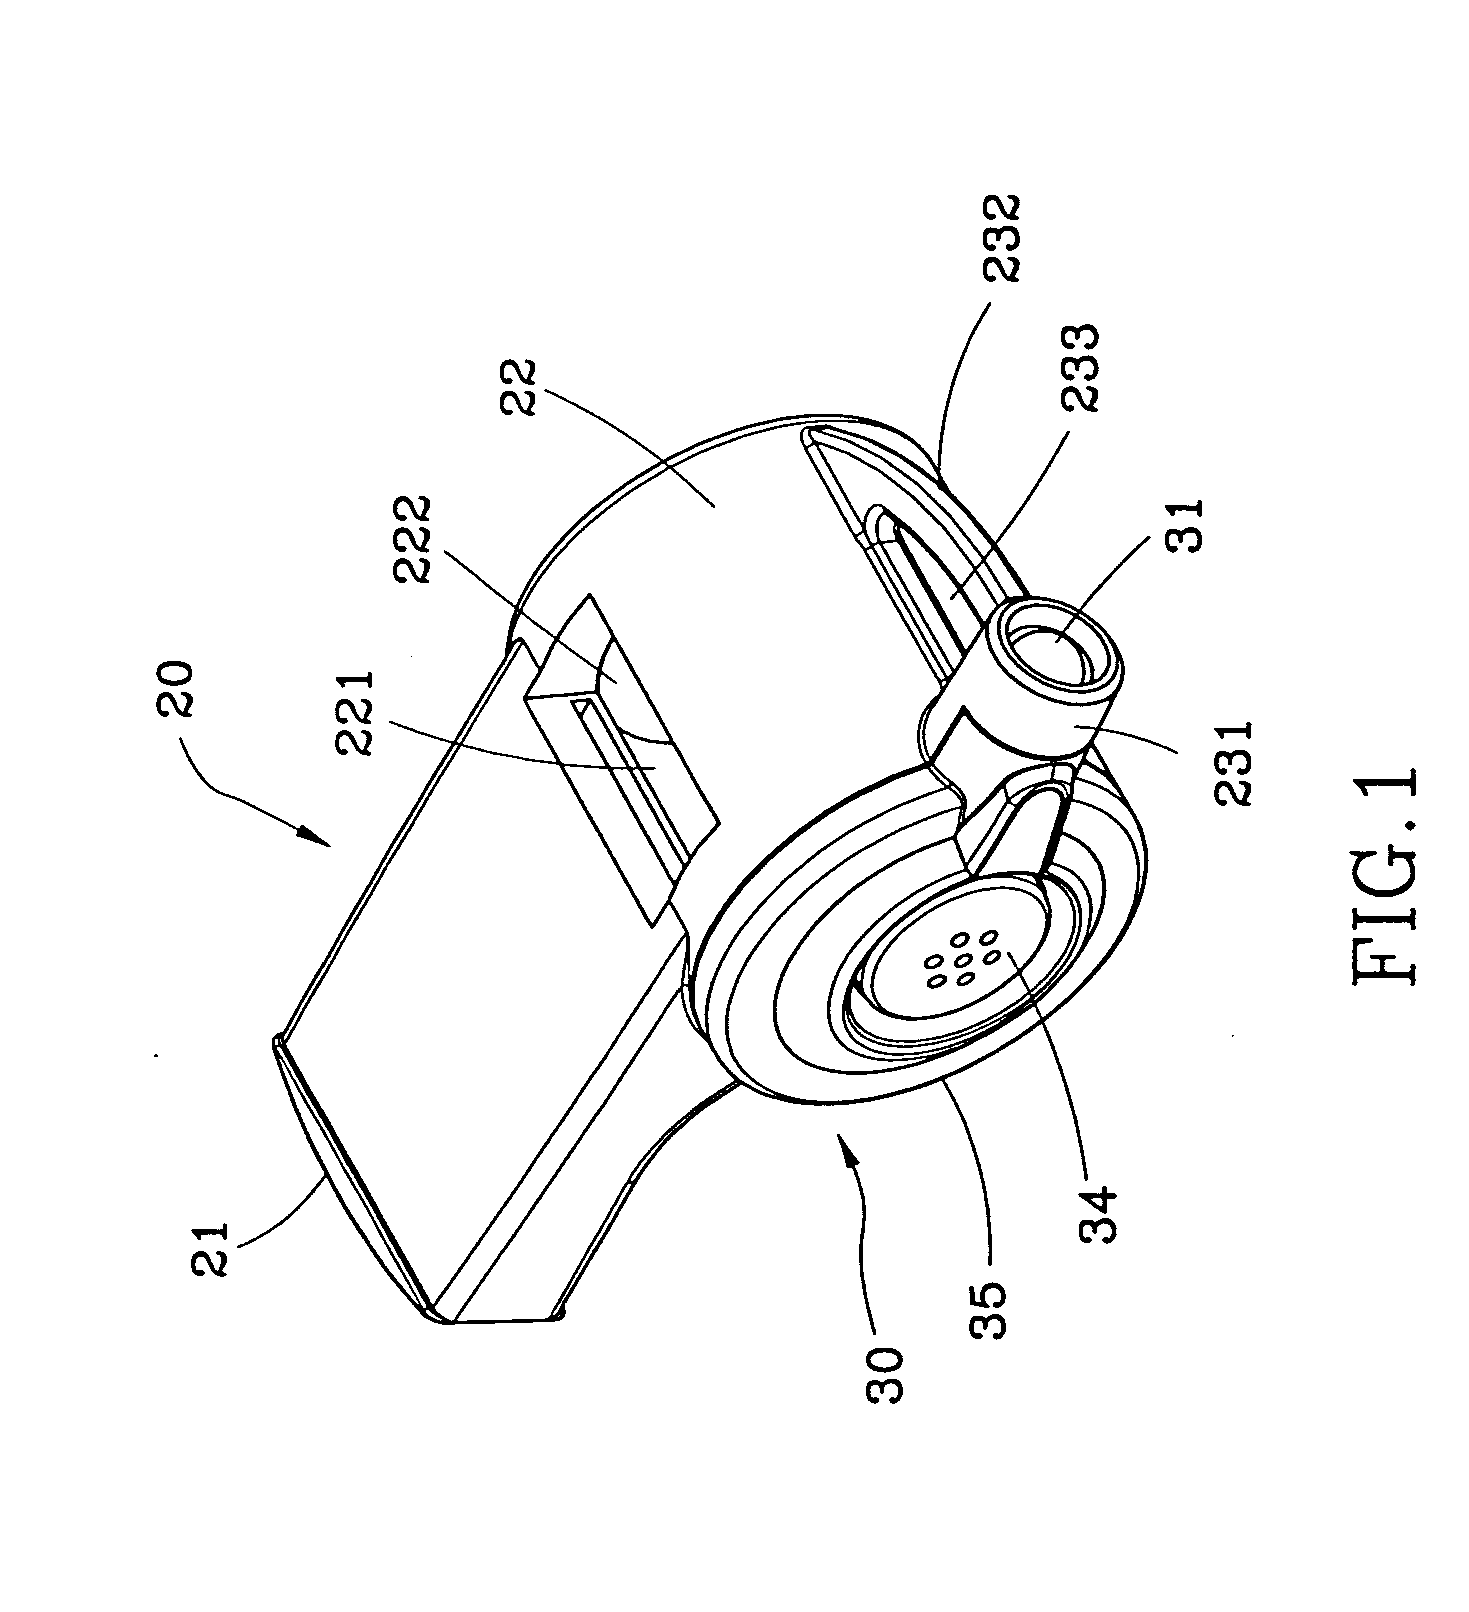 Whistle with light emitting device